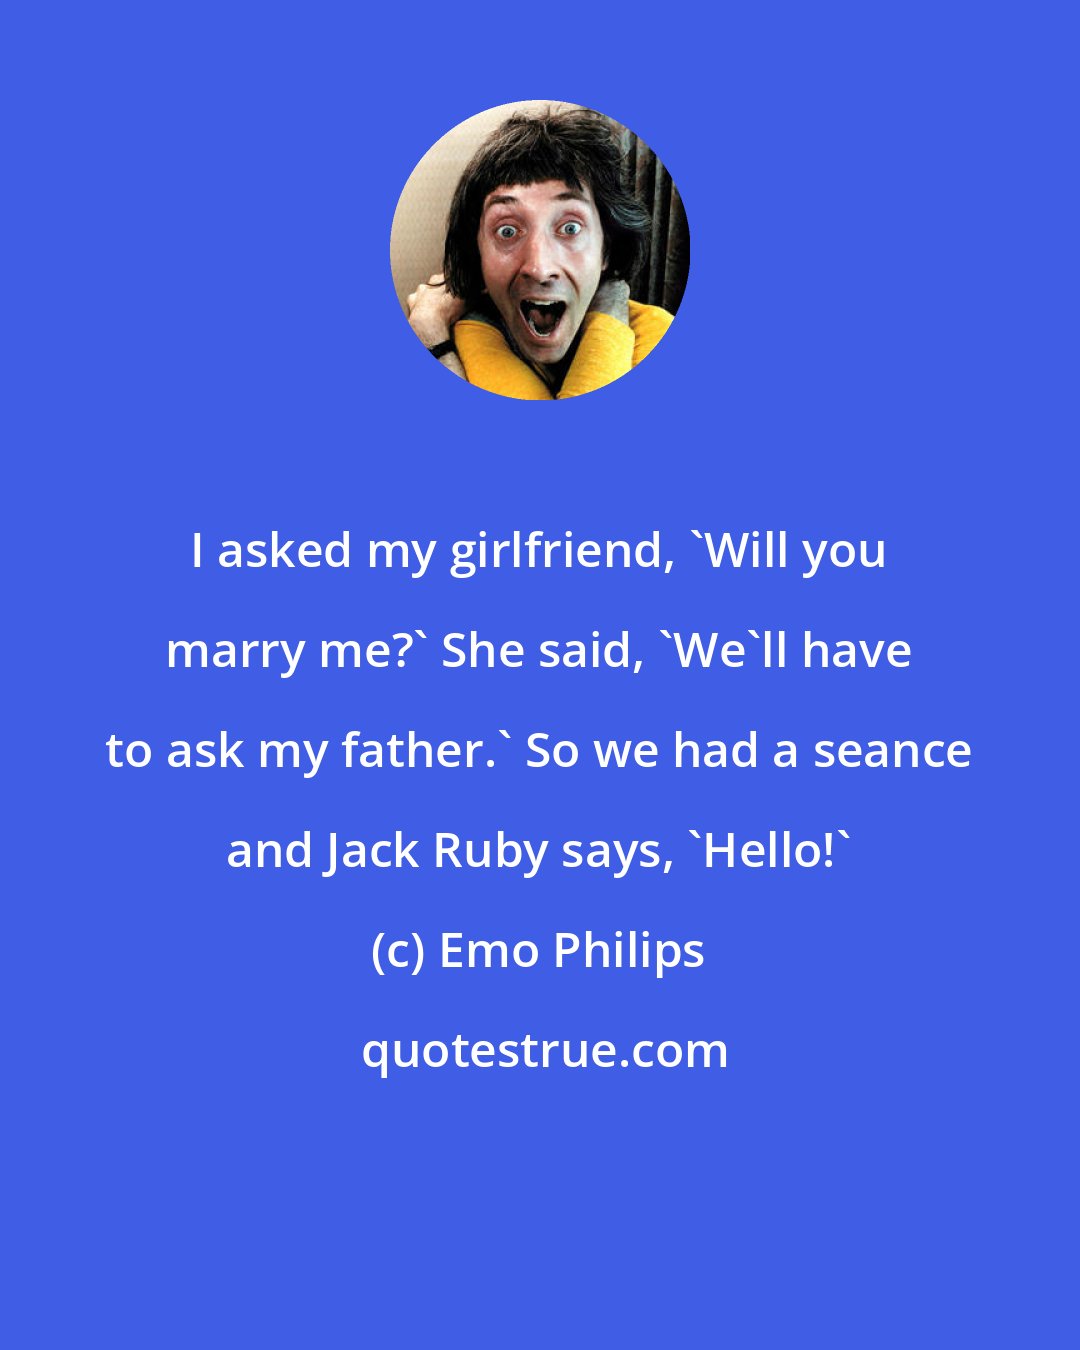 Emo Philips: I asked my girlfriend, 'Will you marry me?' She said, 'We'll have to ask my father.' So we had a seance and Jack Ruby says, 'Hello!'